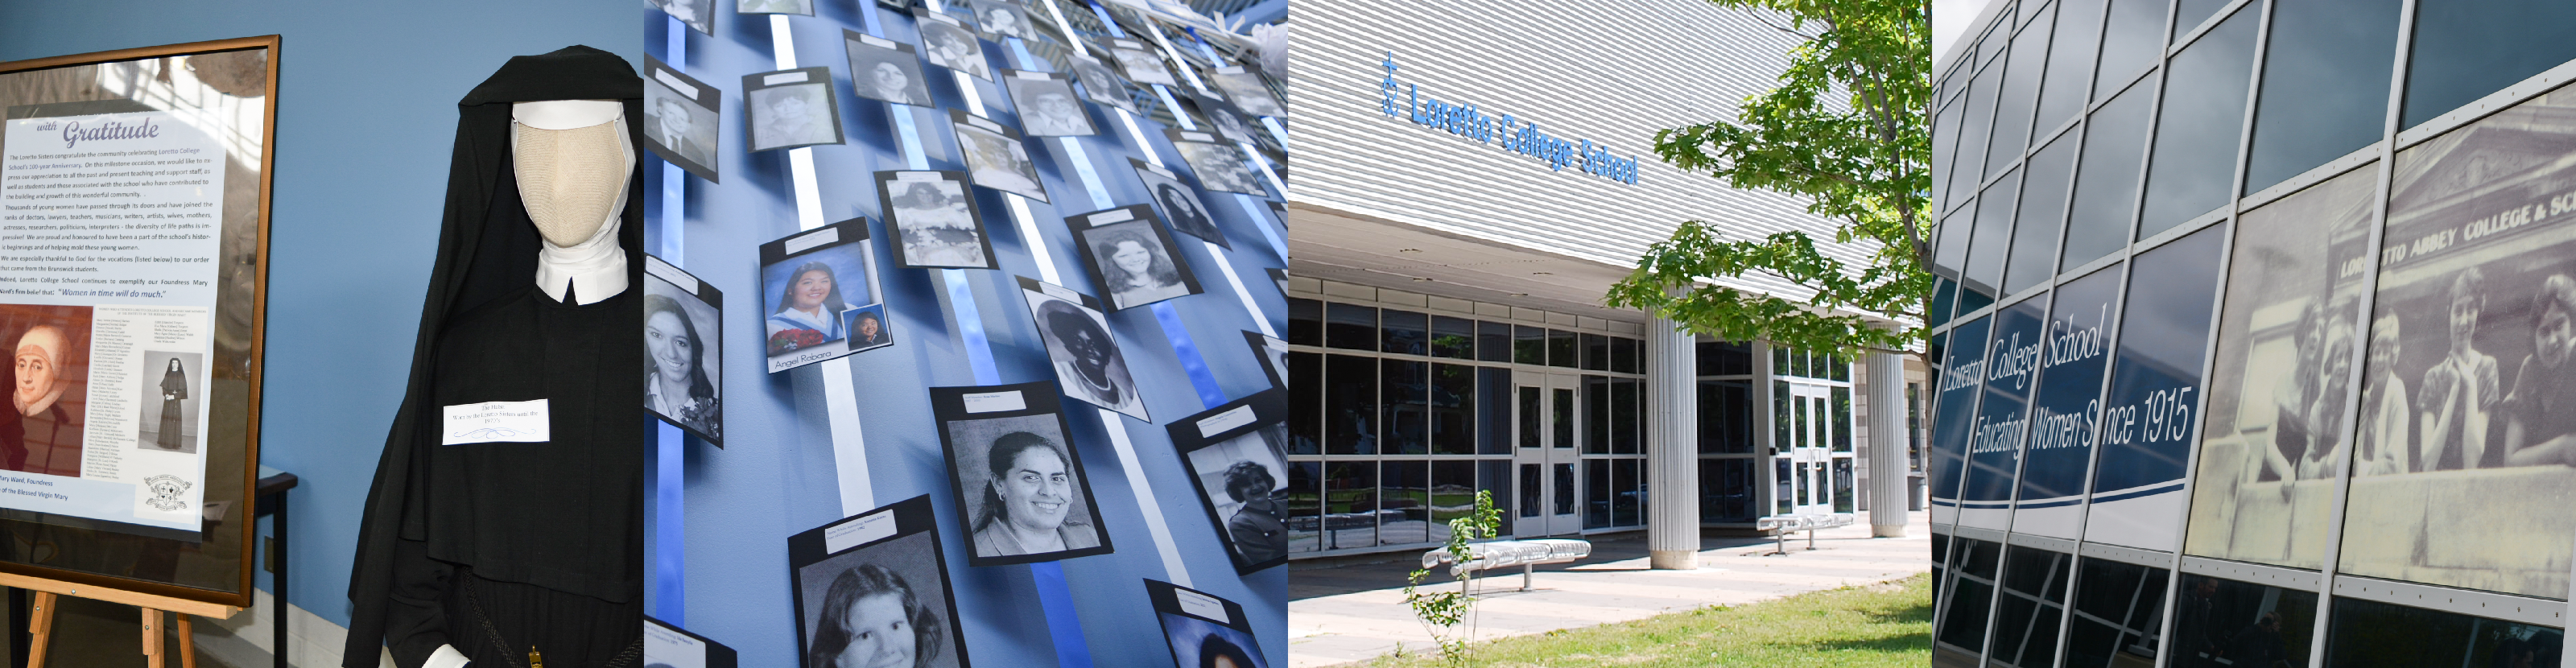 A banner made of four photos. The first photo shows a display of the original Loretto Sisters habit. The second photo shows photos of Loretto students hung as a vertical display down a wall. The third photo shows the front of the Loretto College School building. The fourth photo shows the side of the Loretto College School building, with a banner hung on it that says "Loretto College School Educating Women Since 1915".